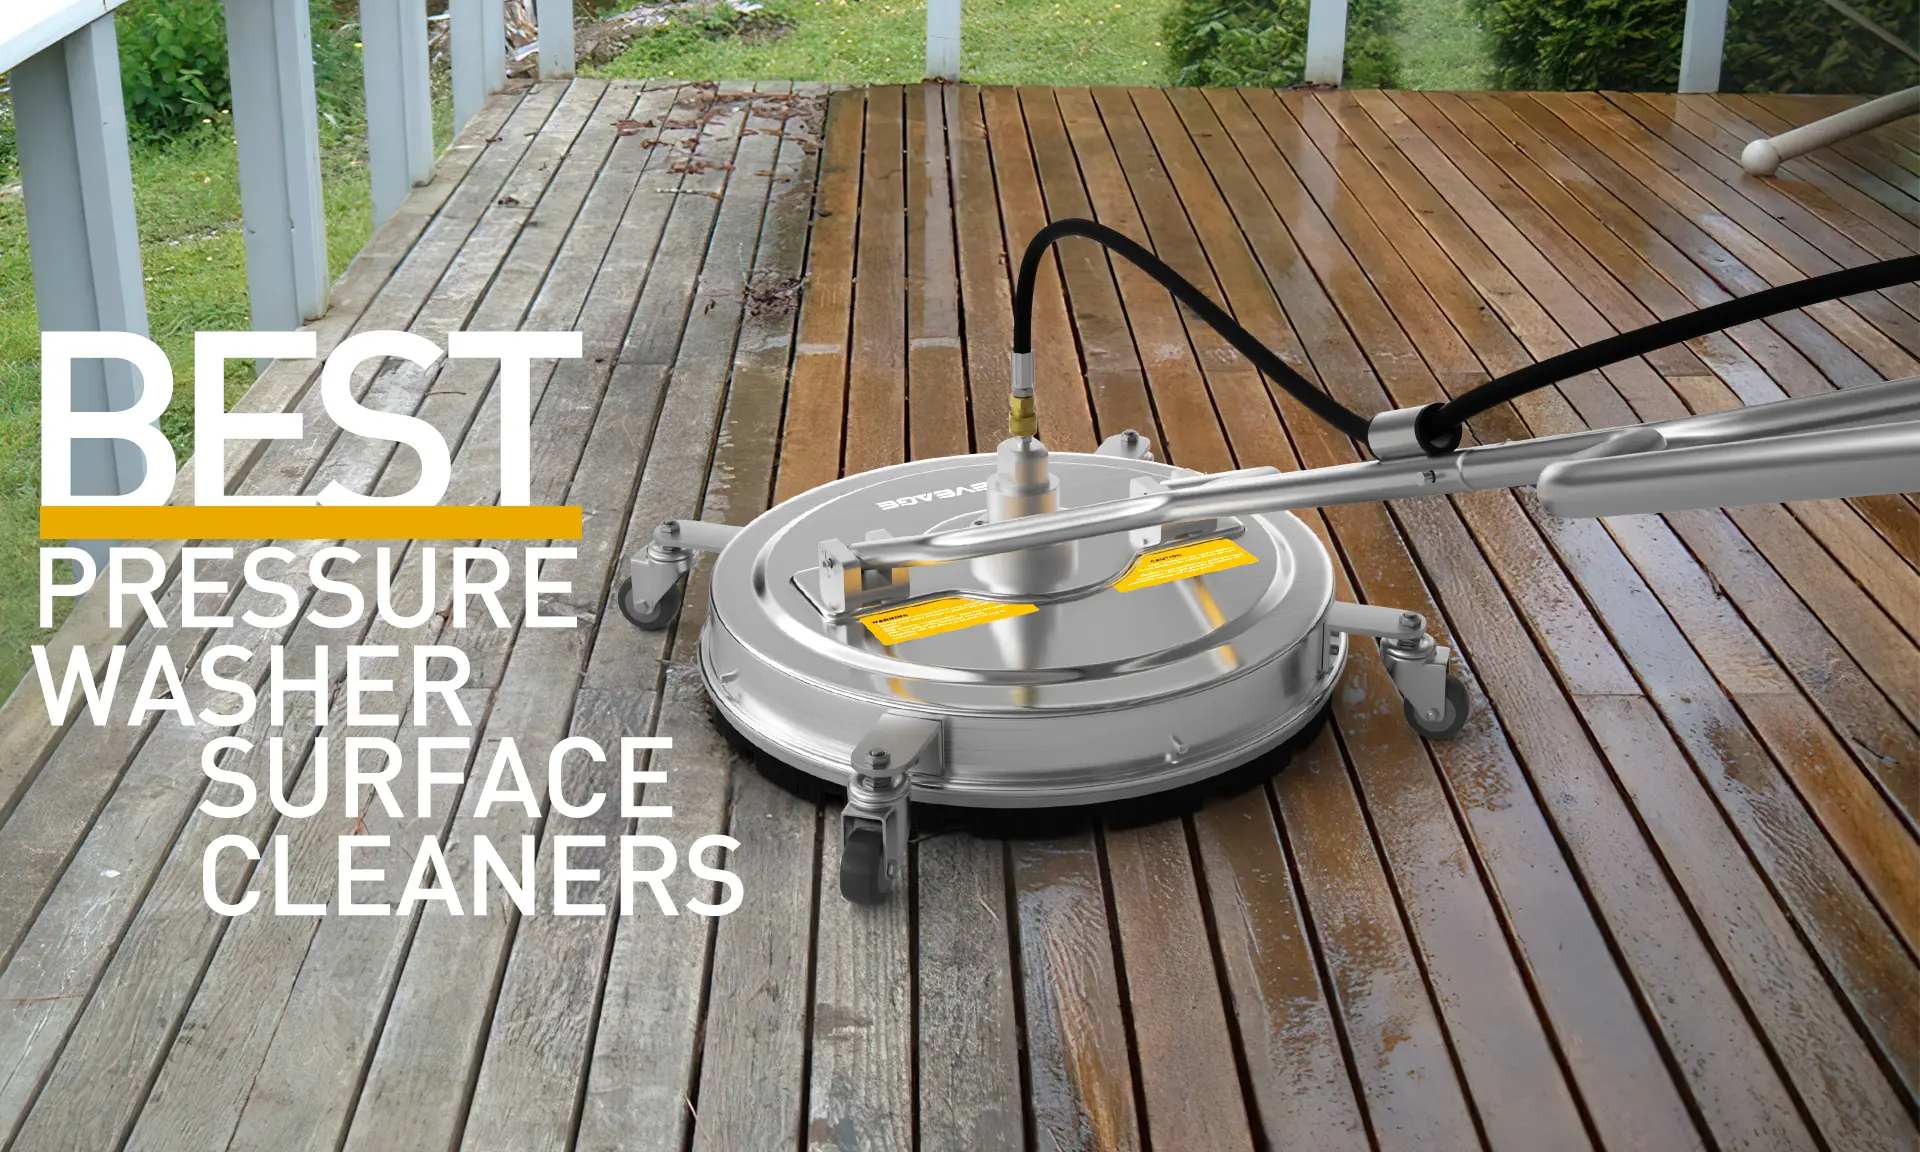 Best pressure Washer surface cleaners